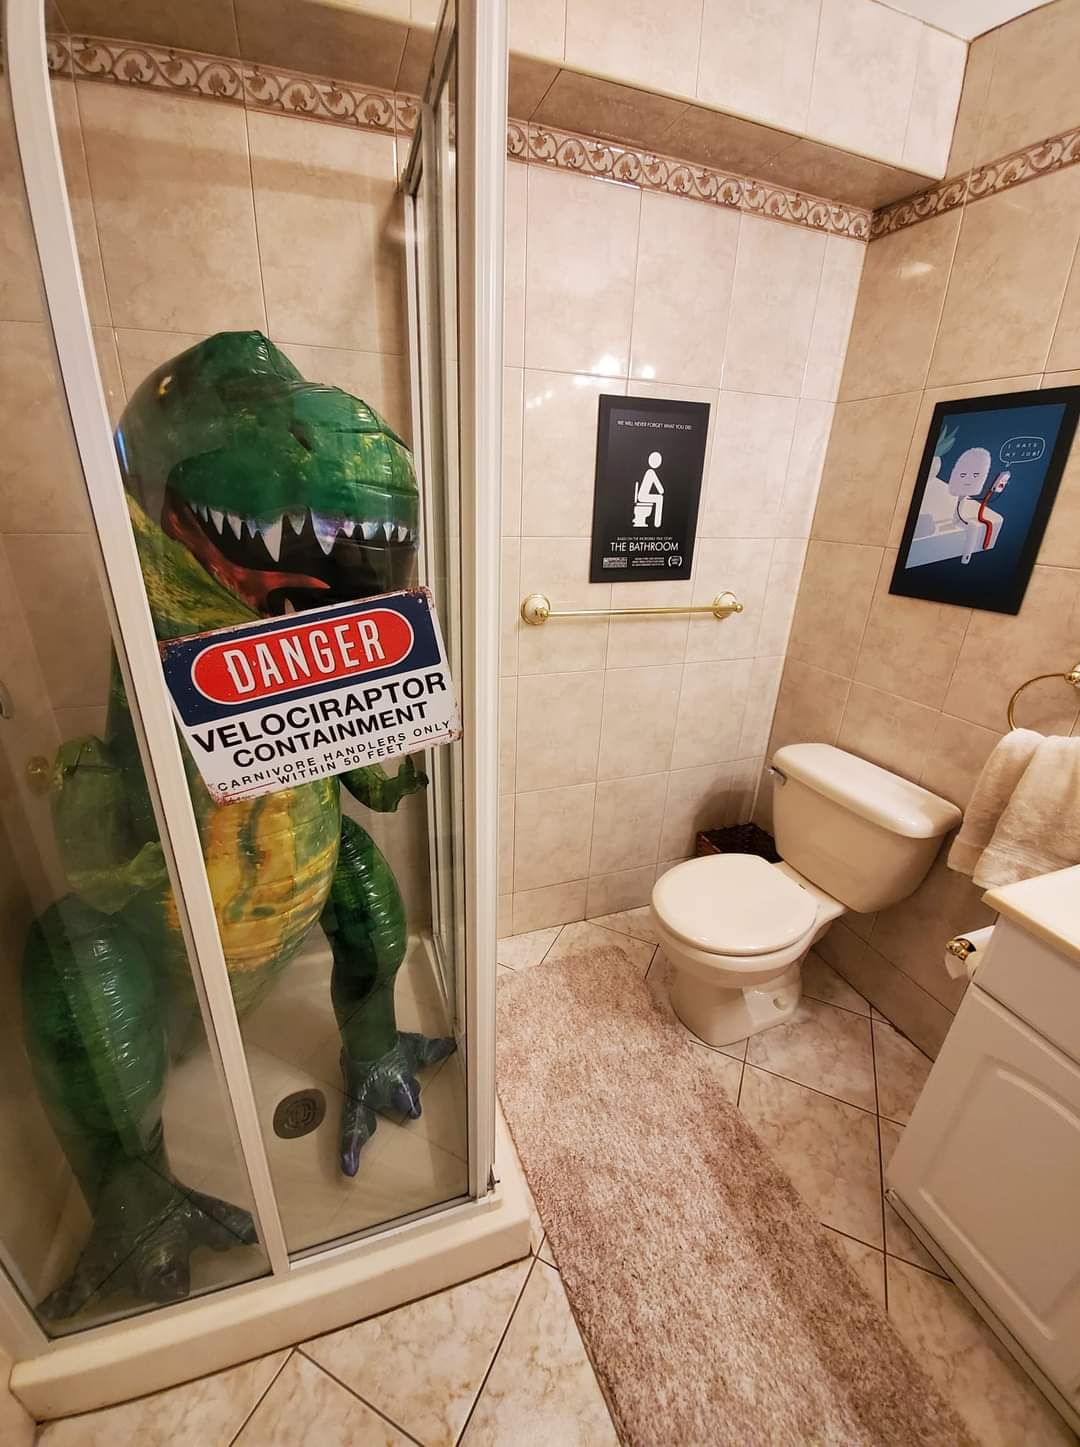 My buddy's wife let him decorate the basement bathroom... no regerts.